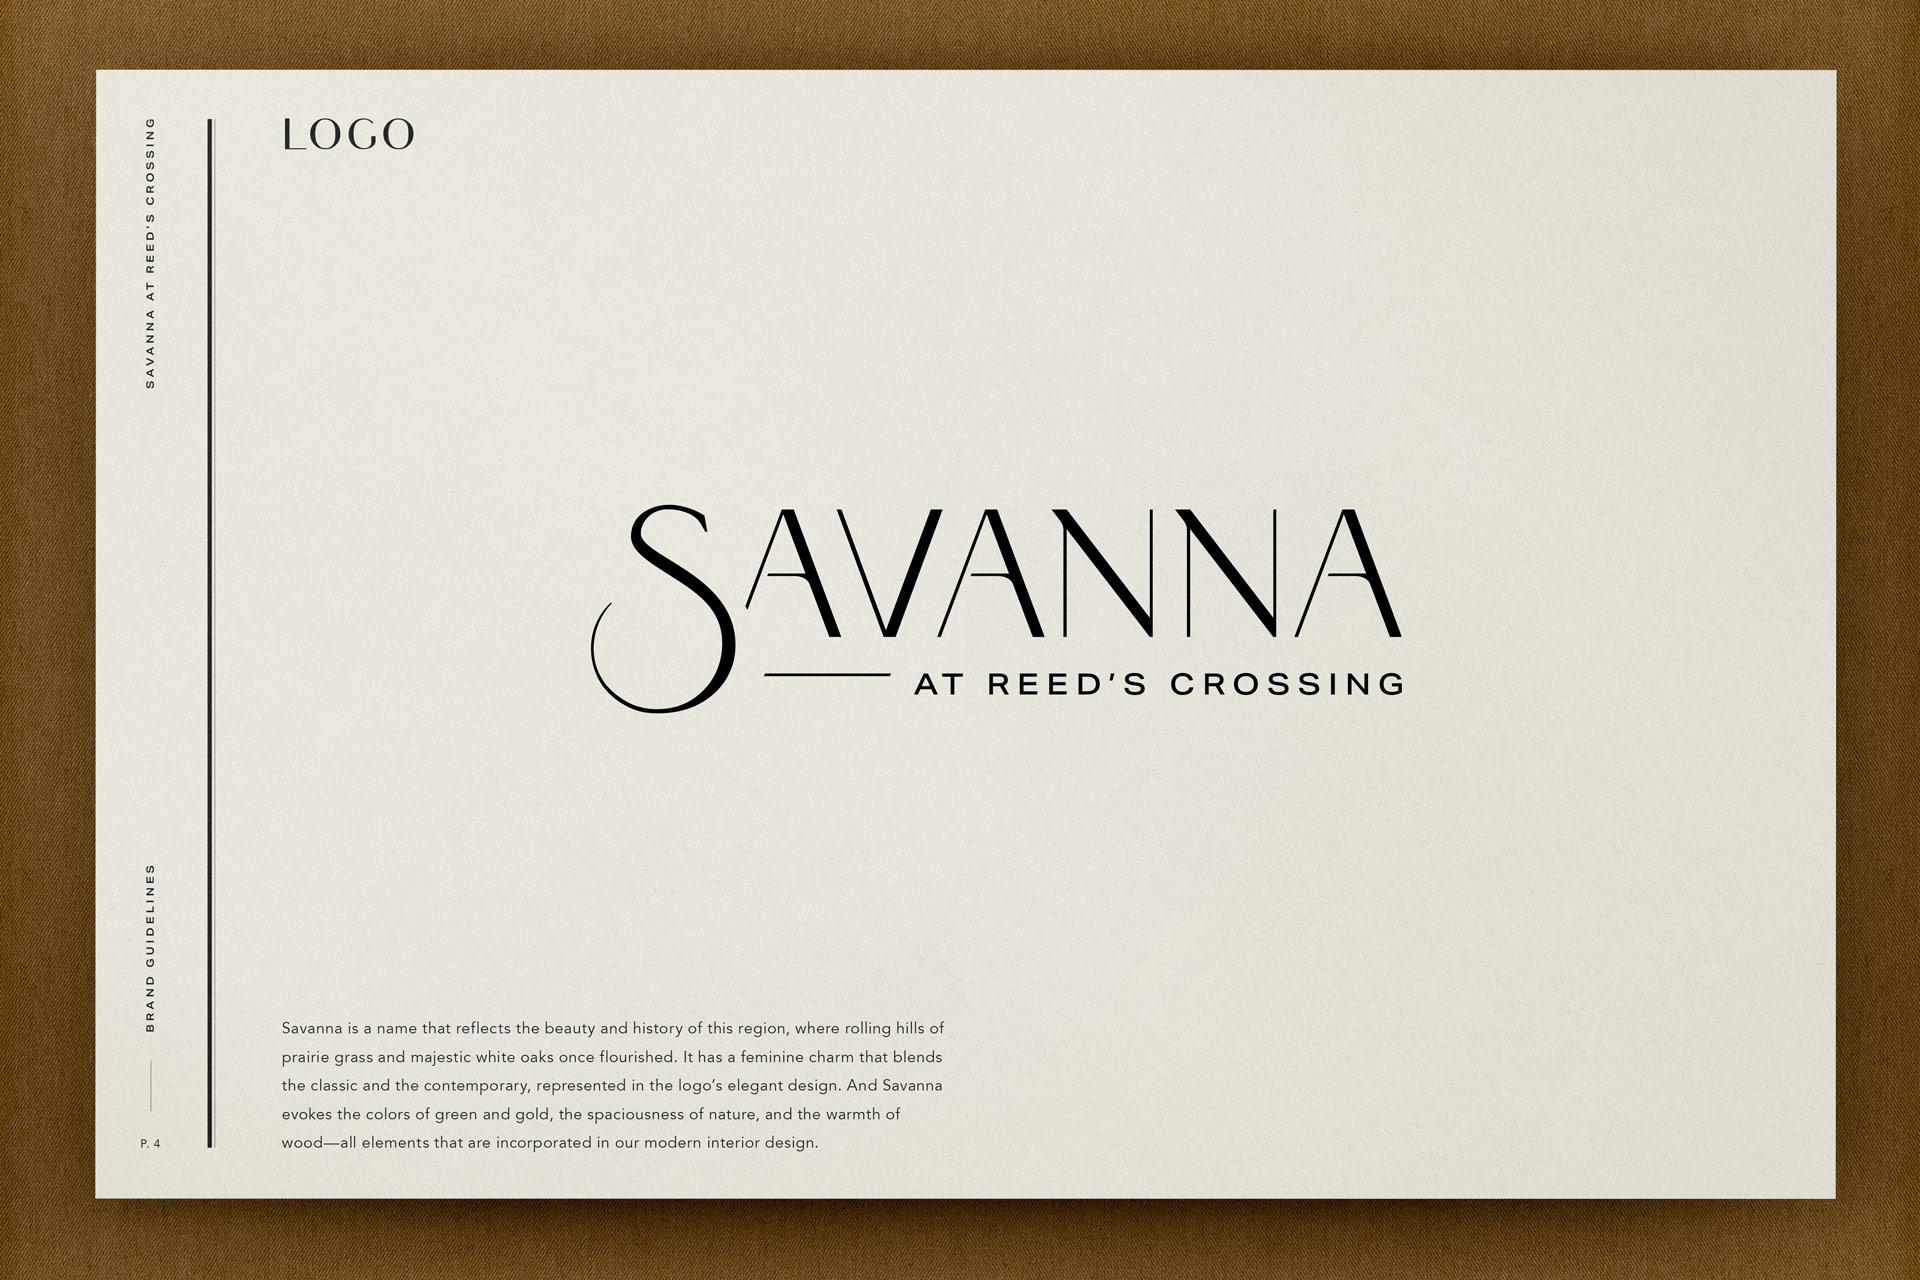 Savanna at Reed's Crossing branding logo created by Incubate Design